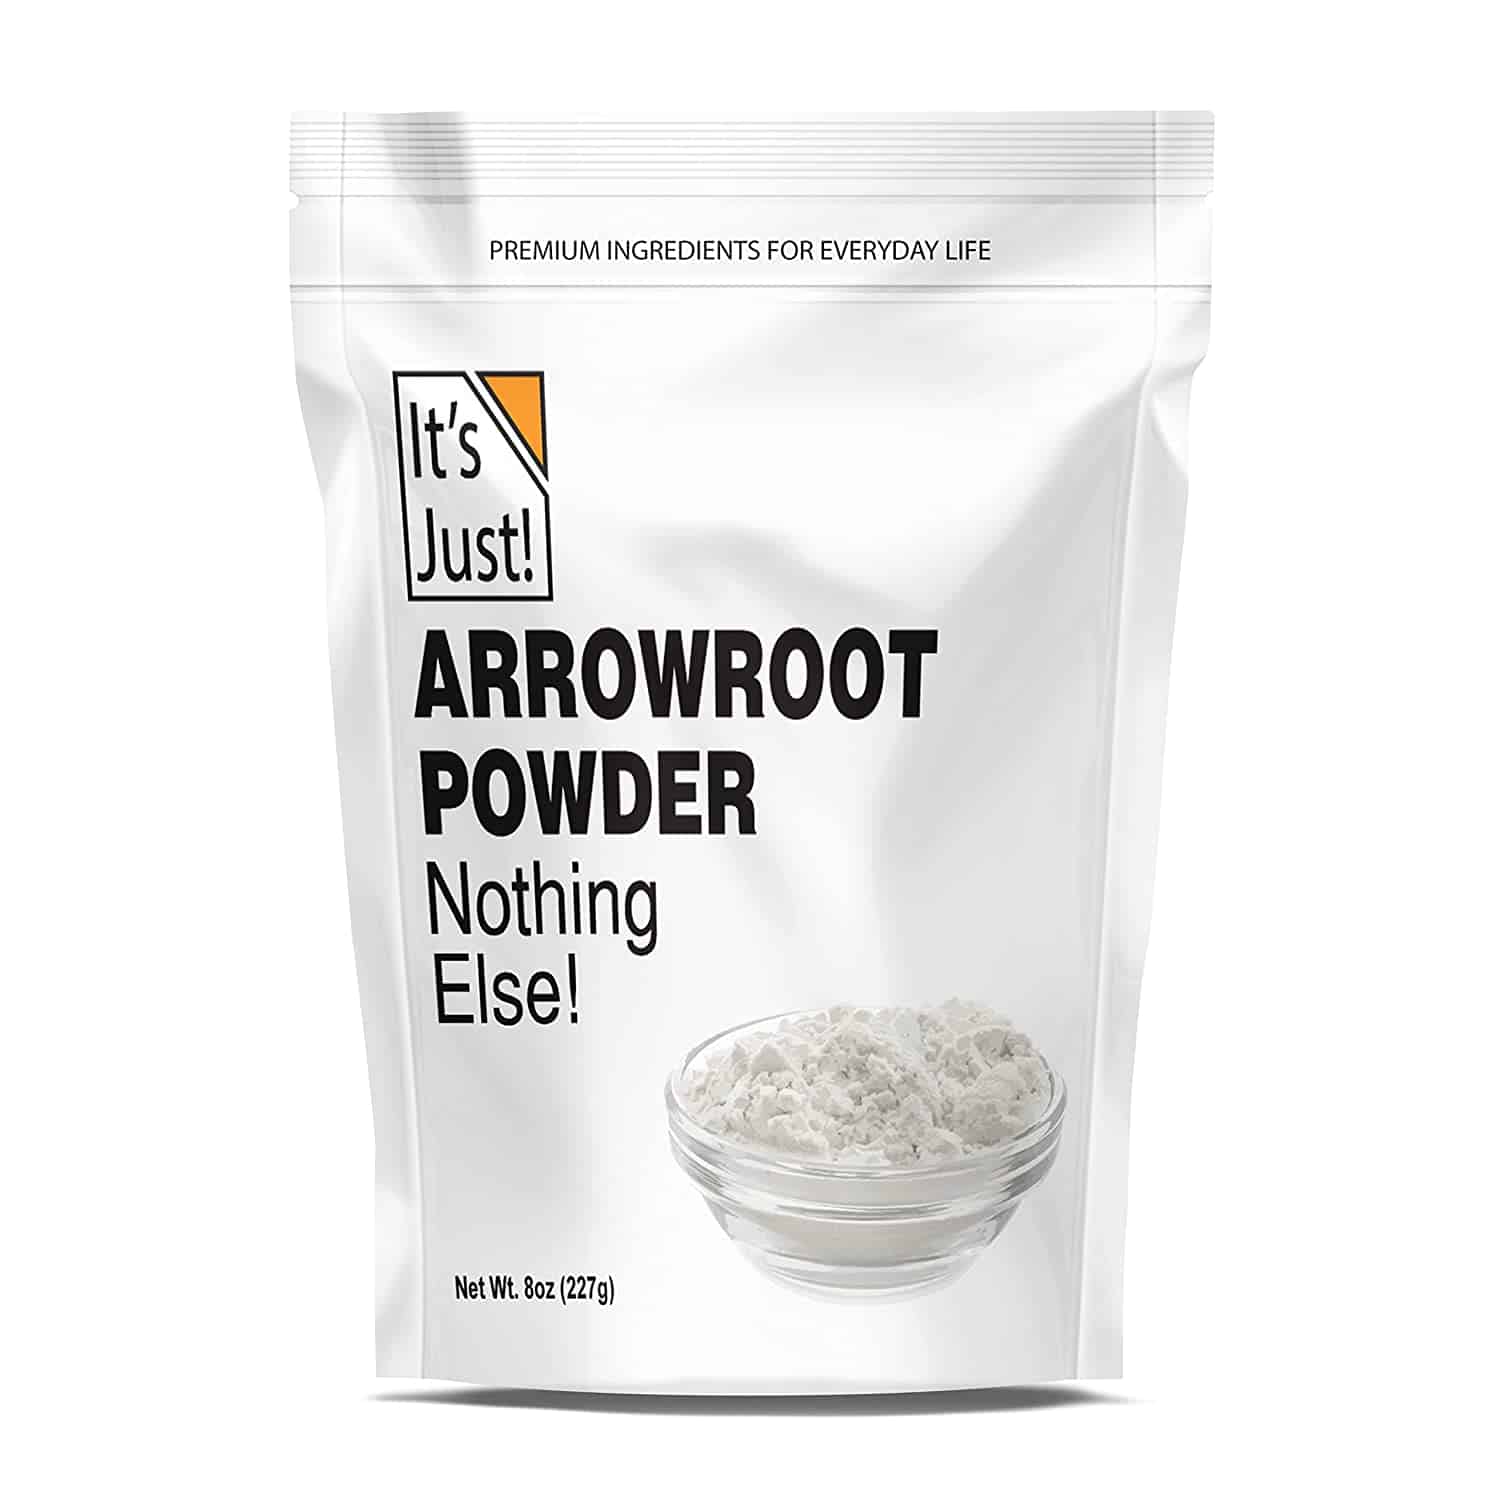 Good substitute for coconut flour is arrowroot powder